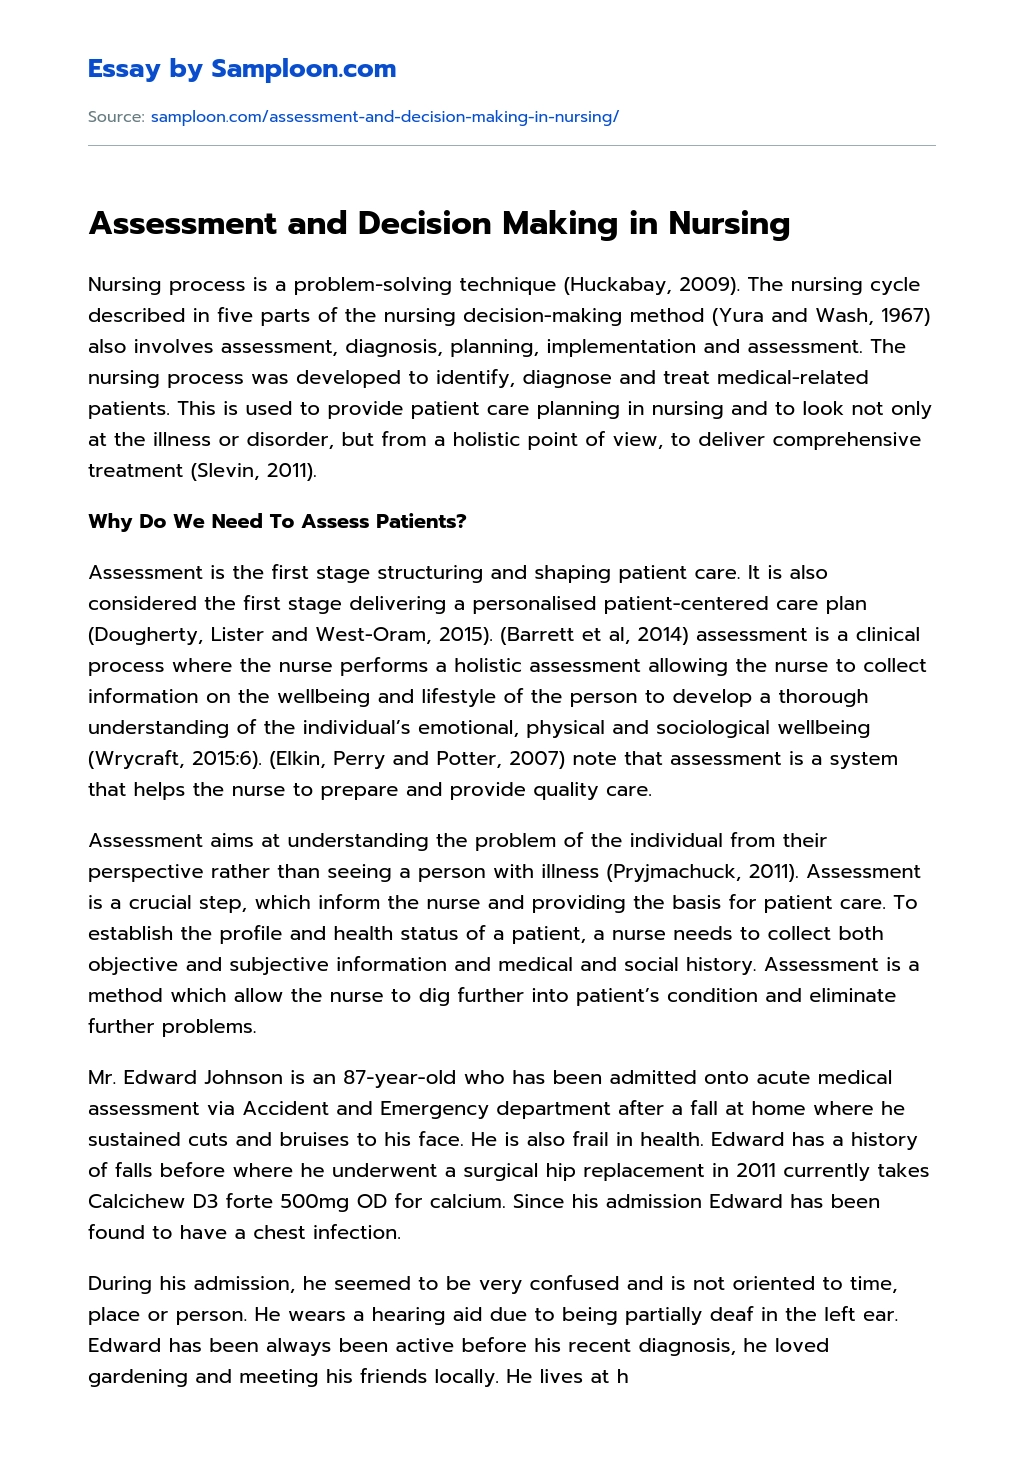 Assessment and Decision Making in Nursing Admission Essay essay